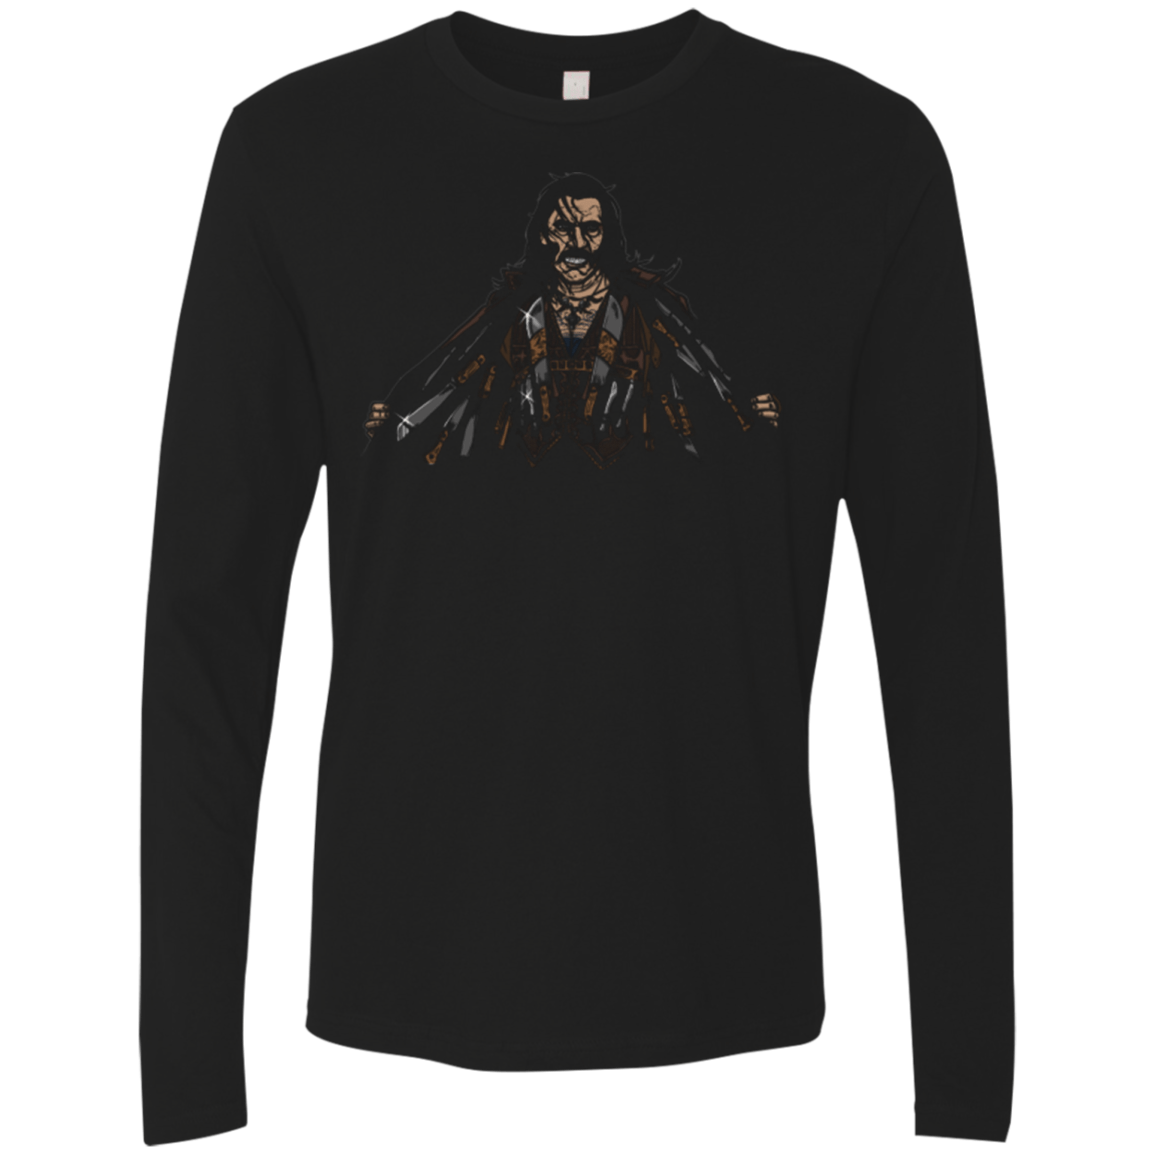 T-Shirts Black / Small Say Hello To My Little Friends Men's Premium Long Sleeve